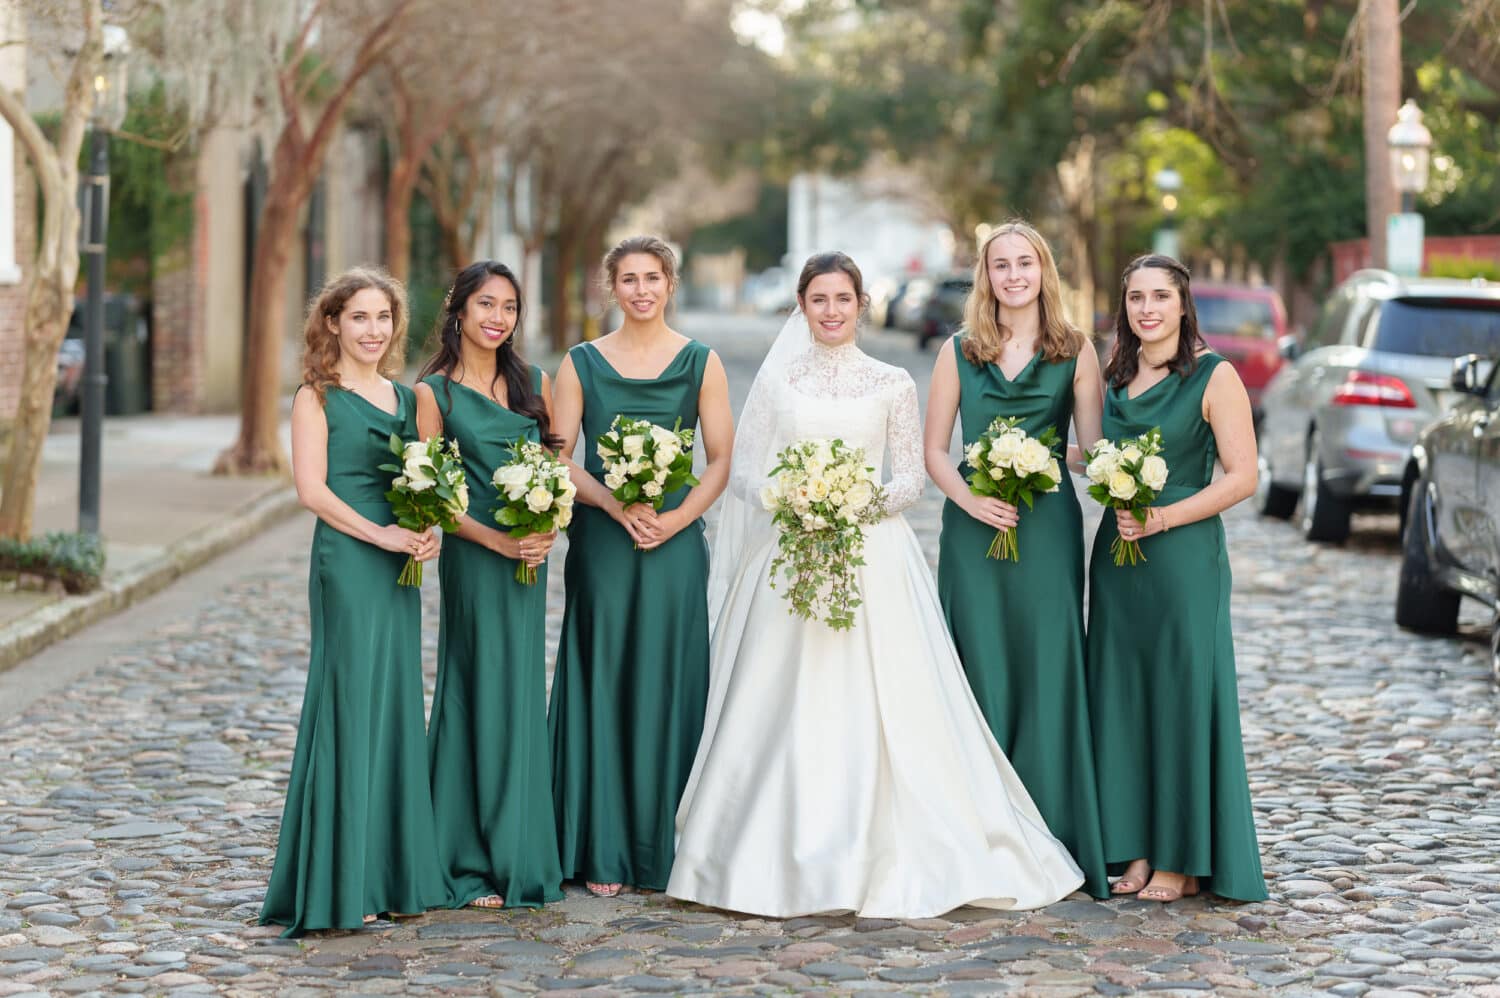 Portraits with the bride and bridesmaids - Chalmers Street